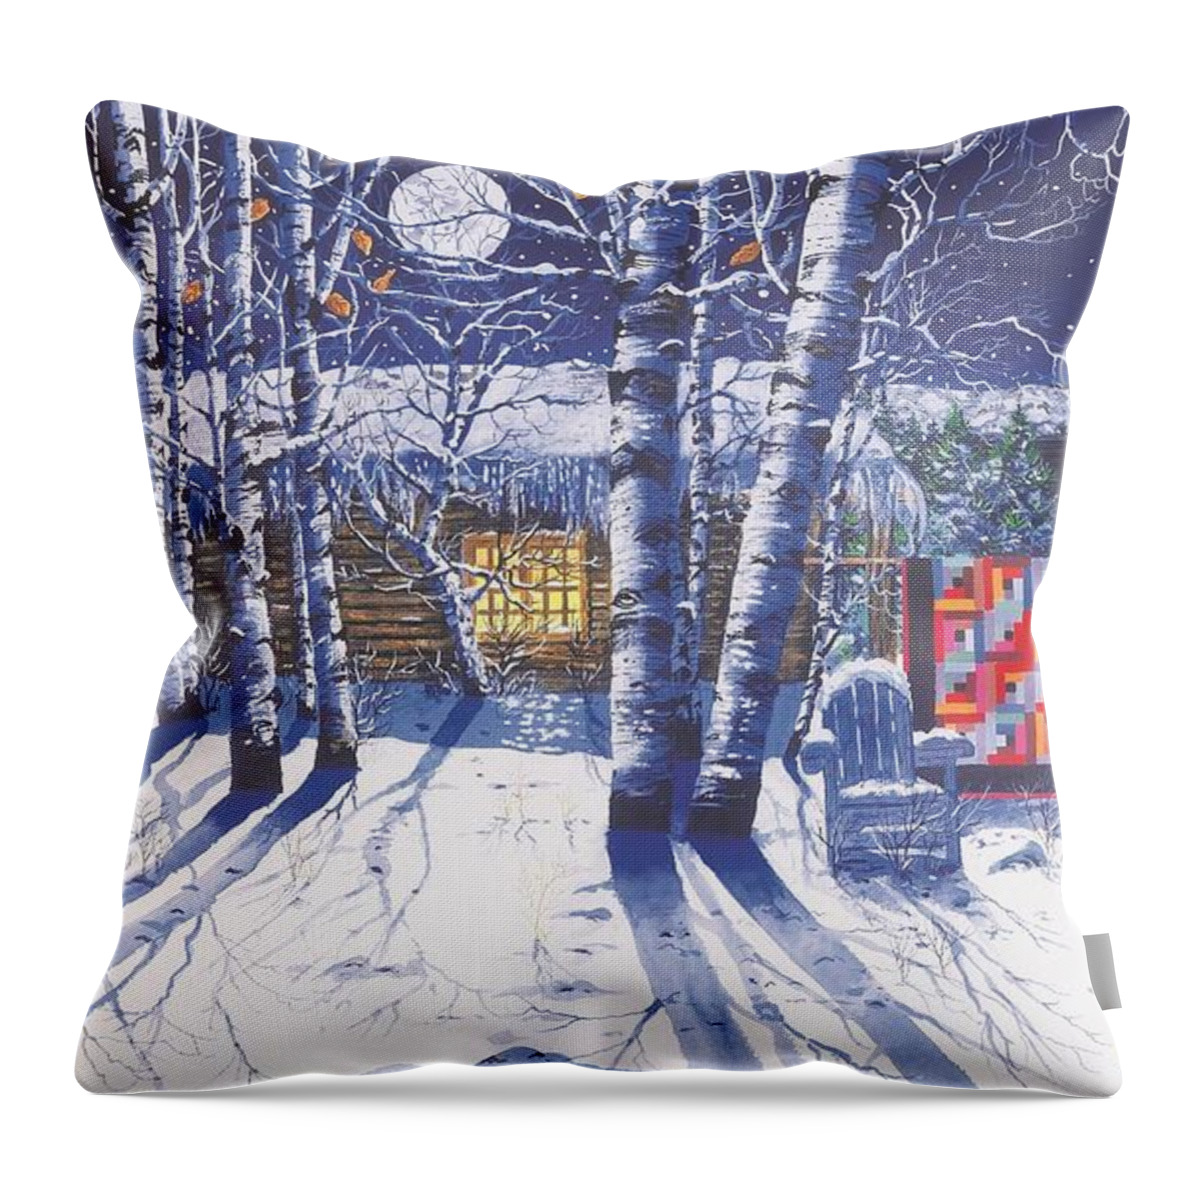 Full Moon Throw Pillow featuring the painting Moonlight by Diane Phalen